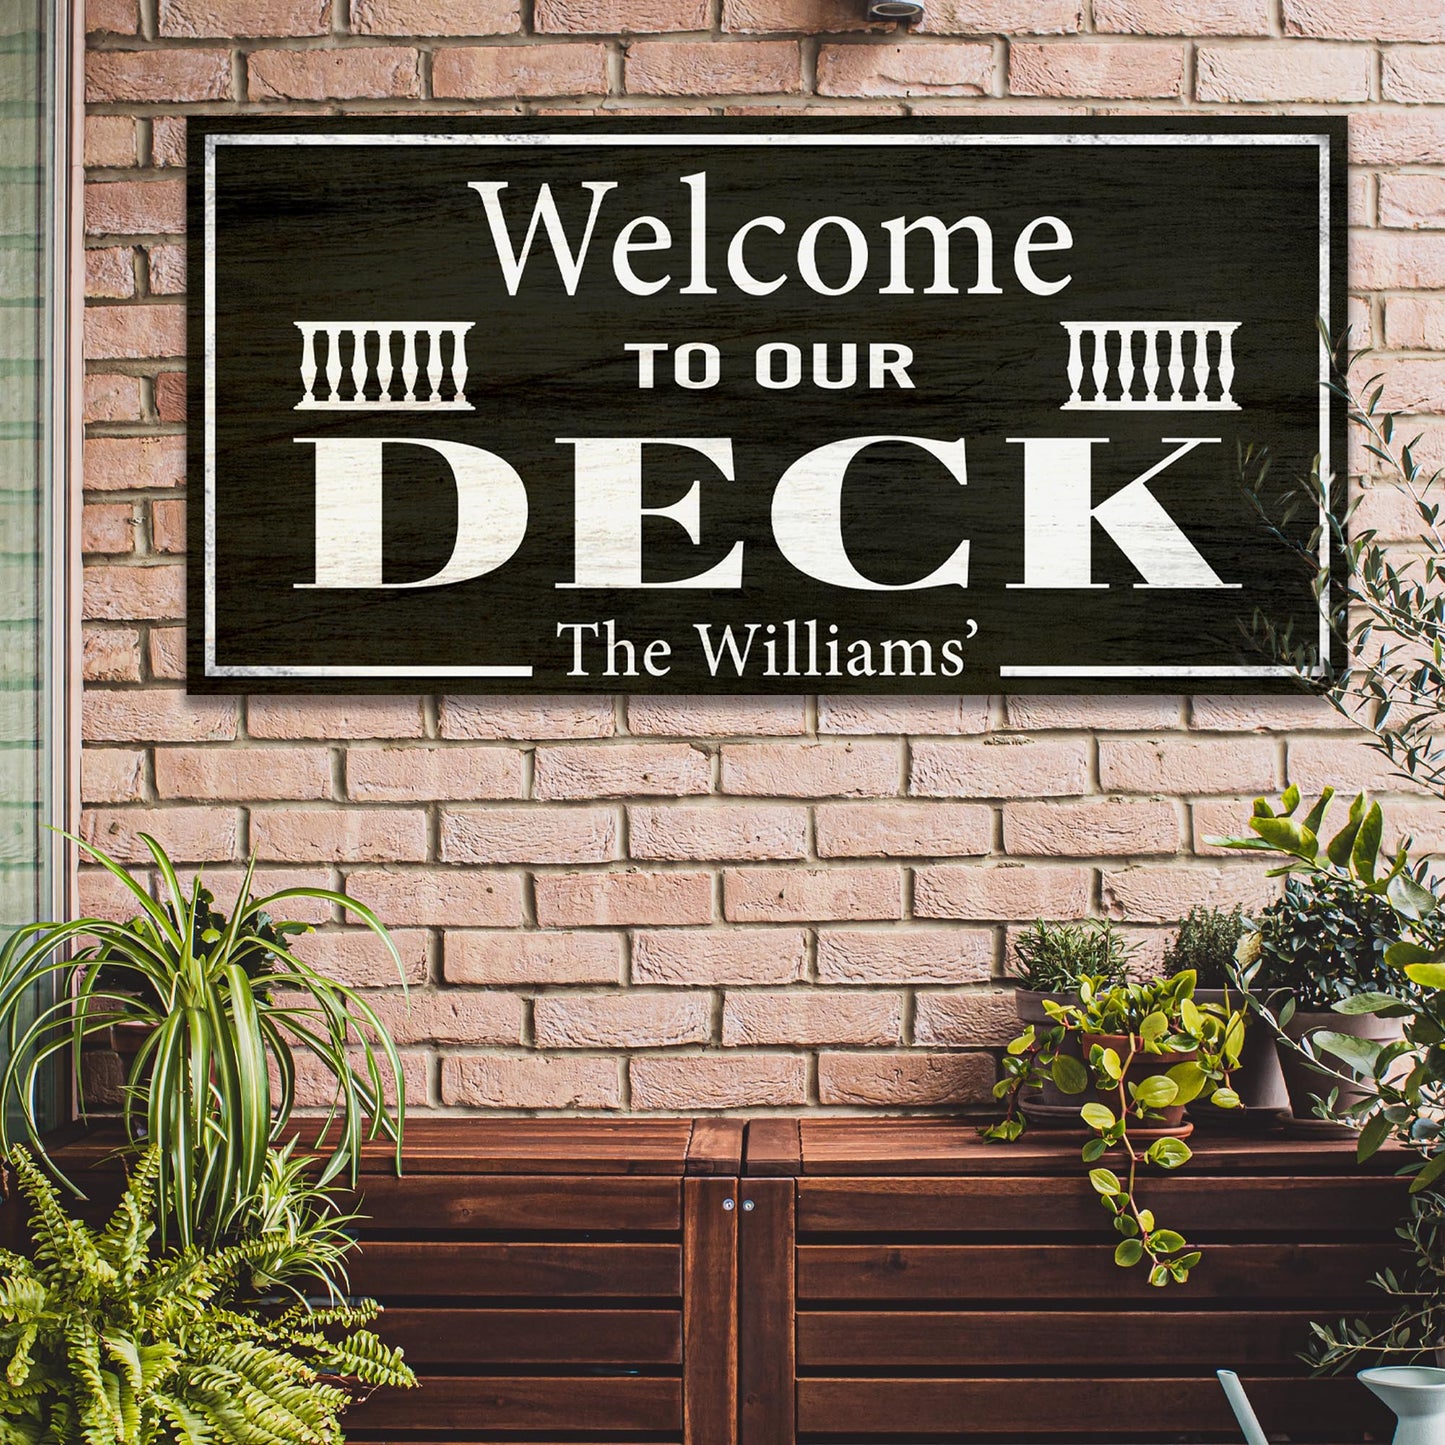 Welcome To Our Deck Sign - Image by Tailored Canvases